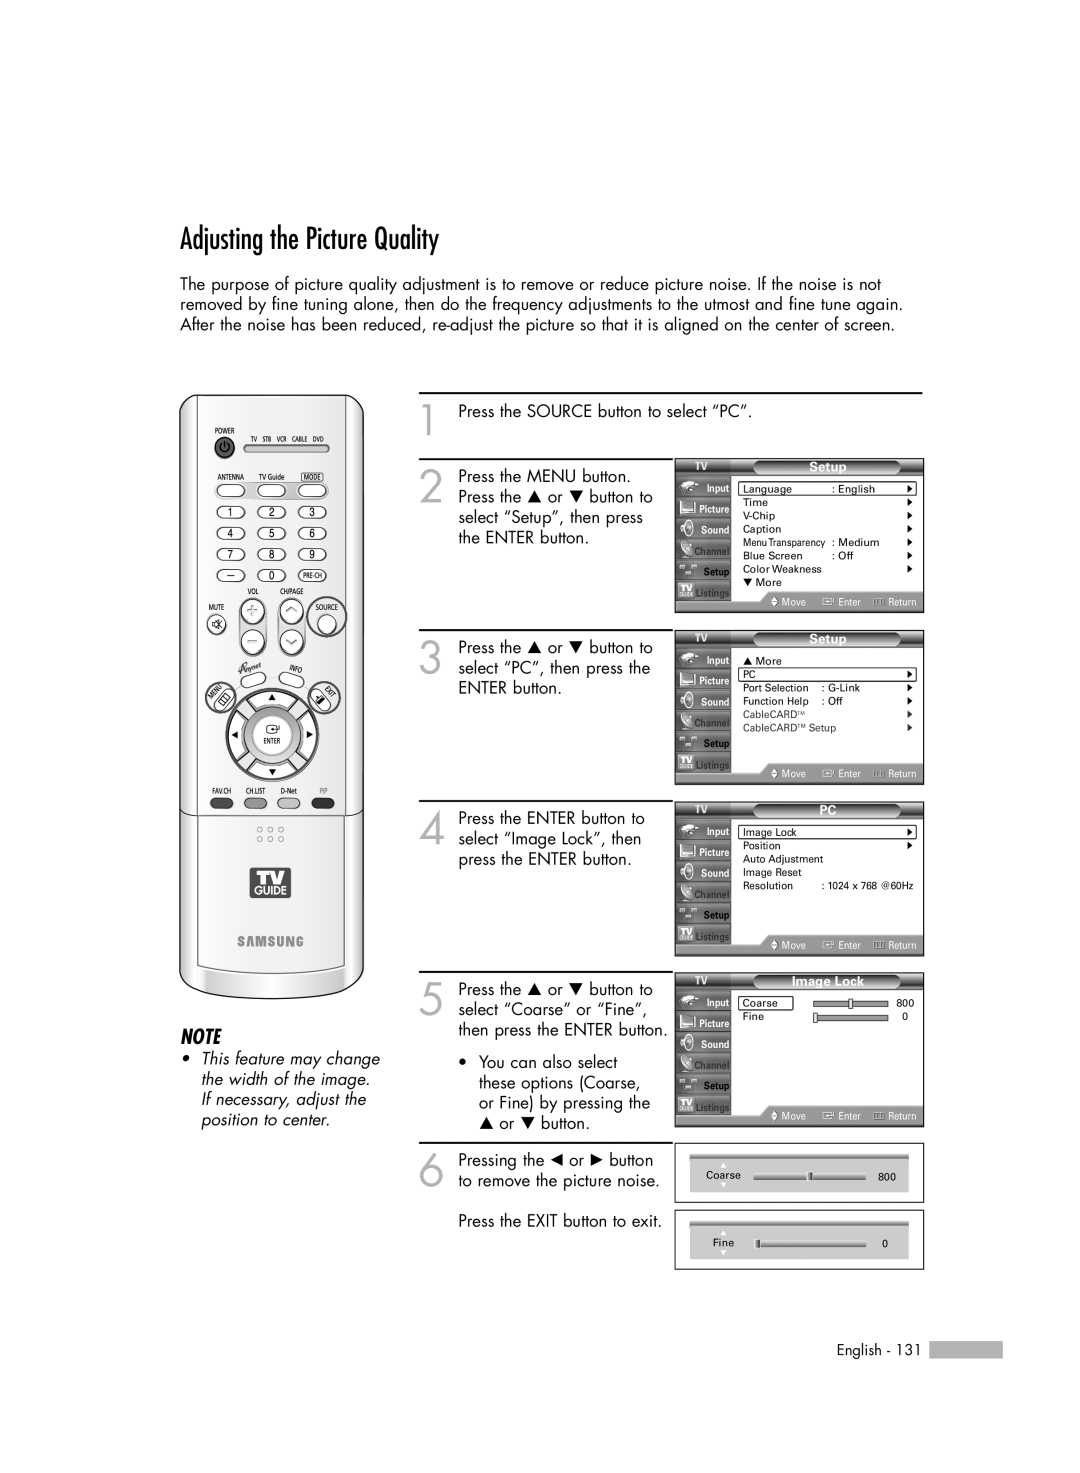 Samsung HL-R7178W manual Adjusting the Picture Quality, Press the SOURCE button to select “PC”, Press the … or † button to 